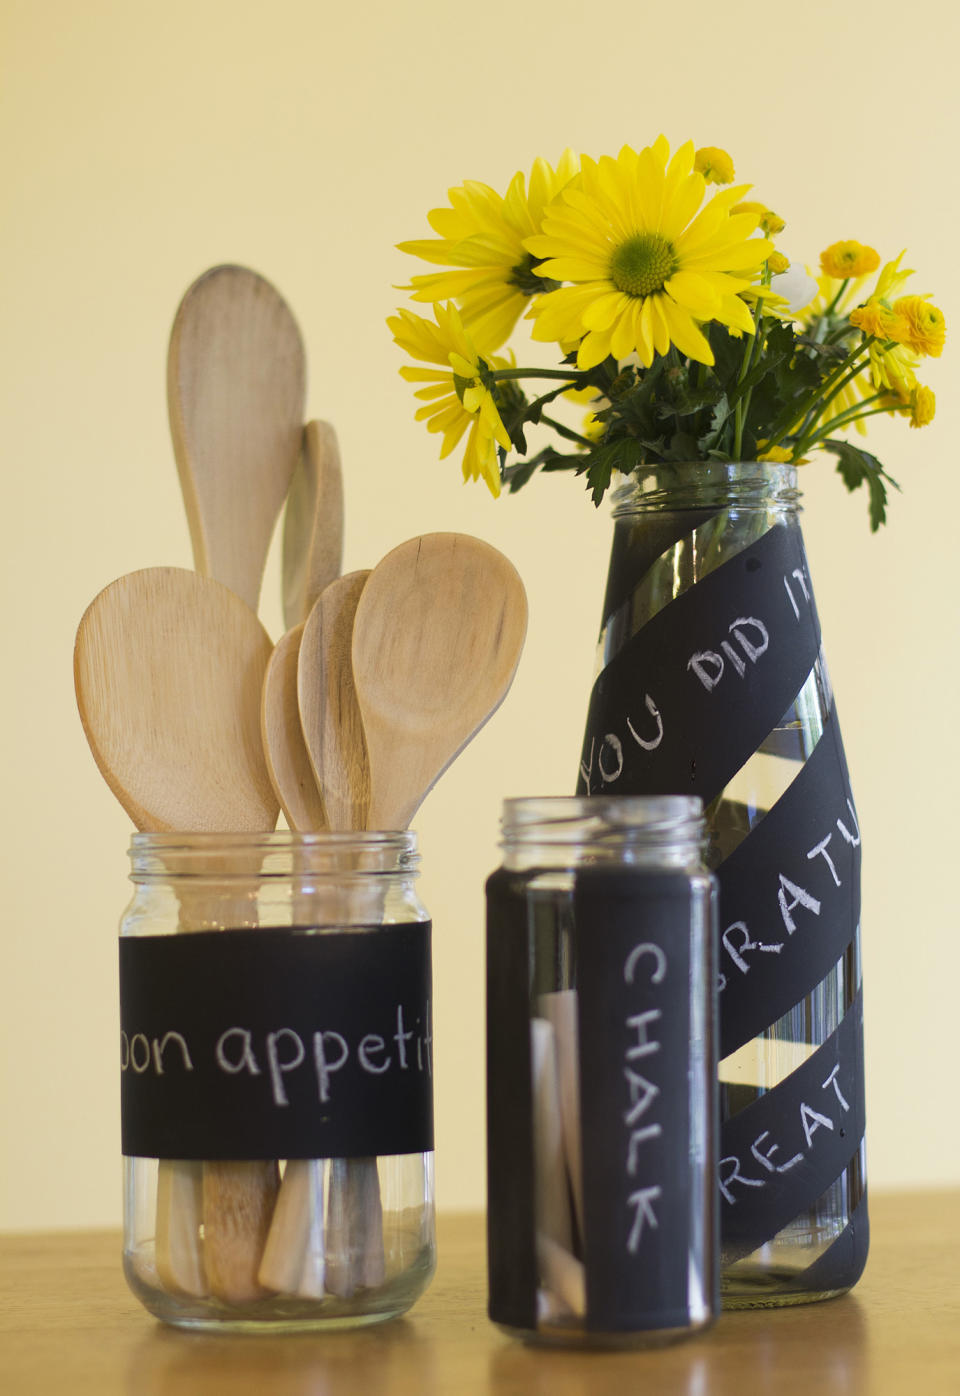 This May 21, 2012, photo in Concord, N.H., shows recycled jars and bottles decorated with chalkboard spray paint. (AP Photo/Holly Ramer)